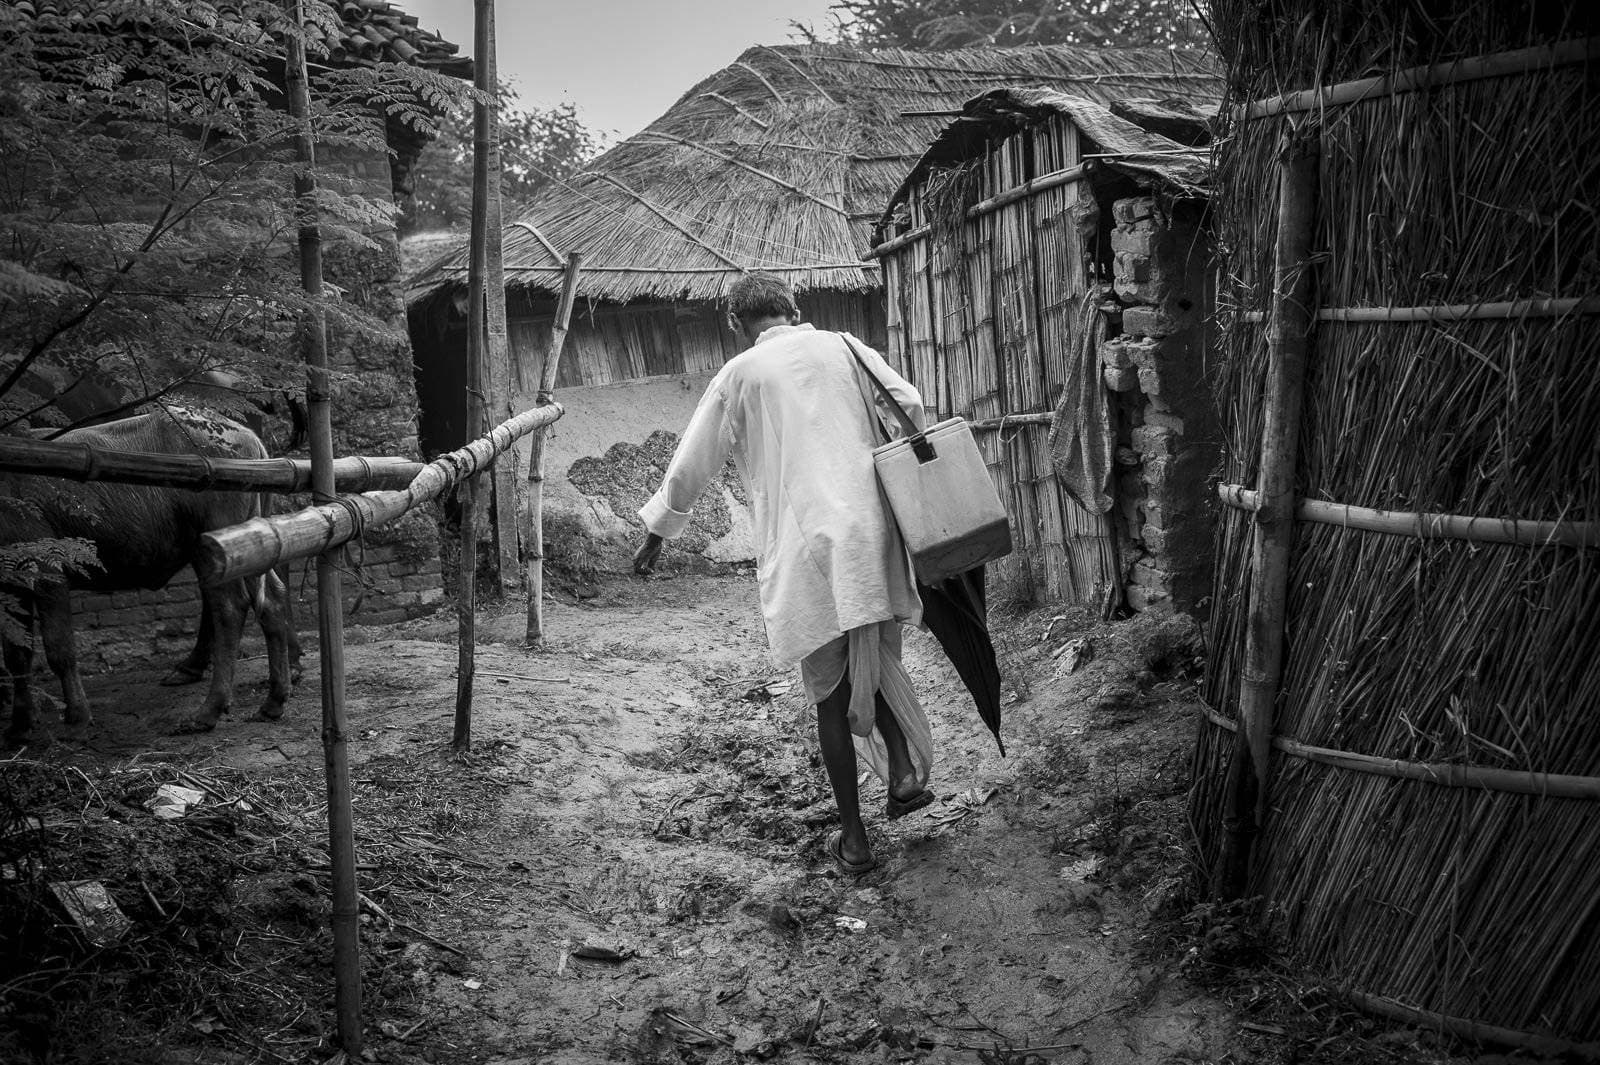 Documentary Photography for NGOs